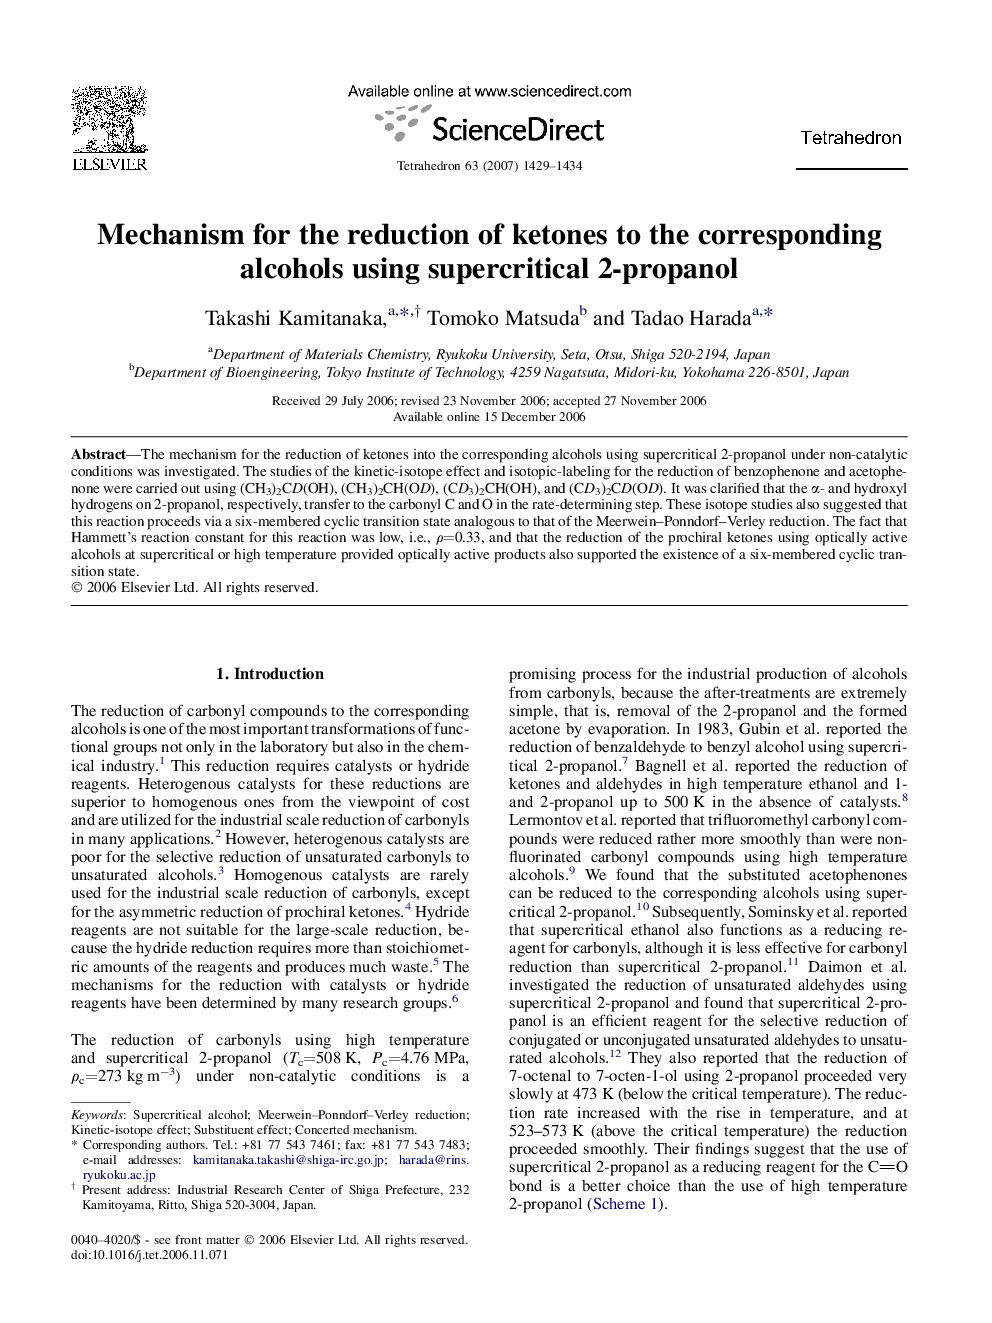 Mechanism for the reduction of ketones to the corresponding alcohols using supercritical 2-propanol